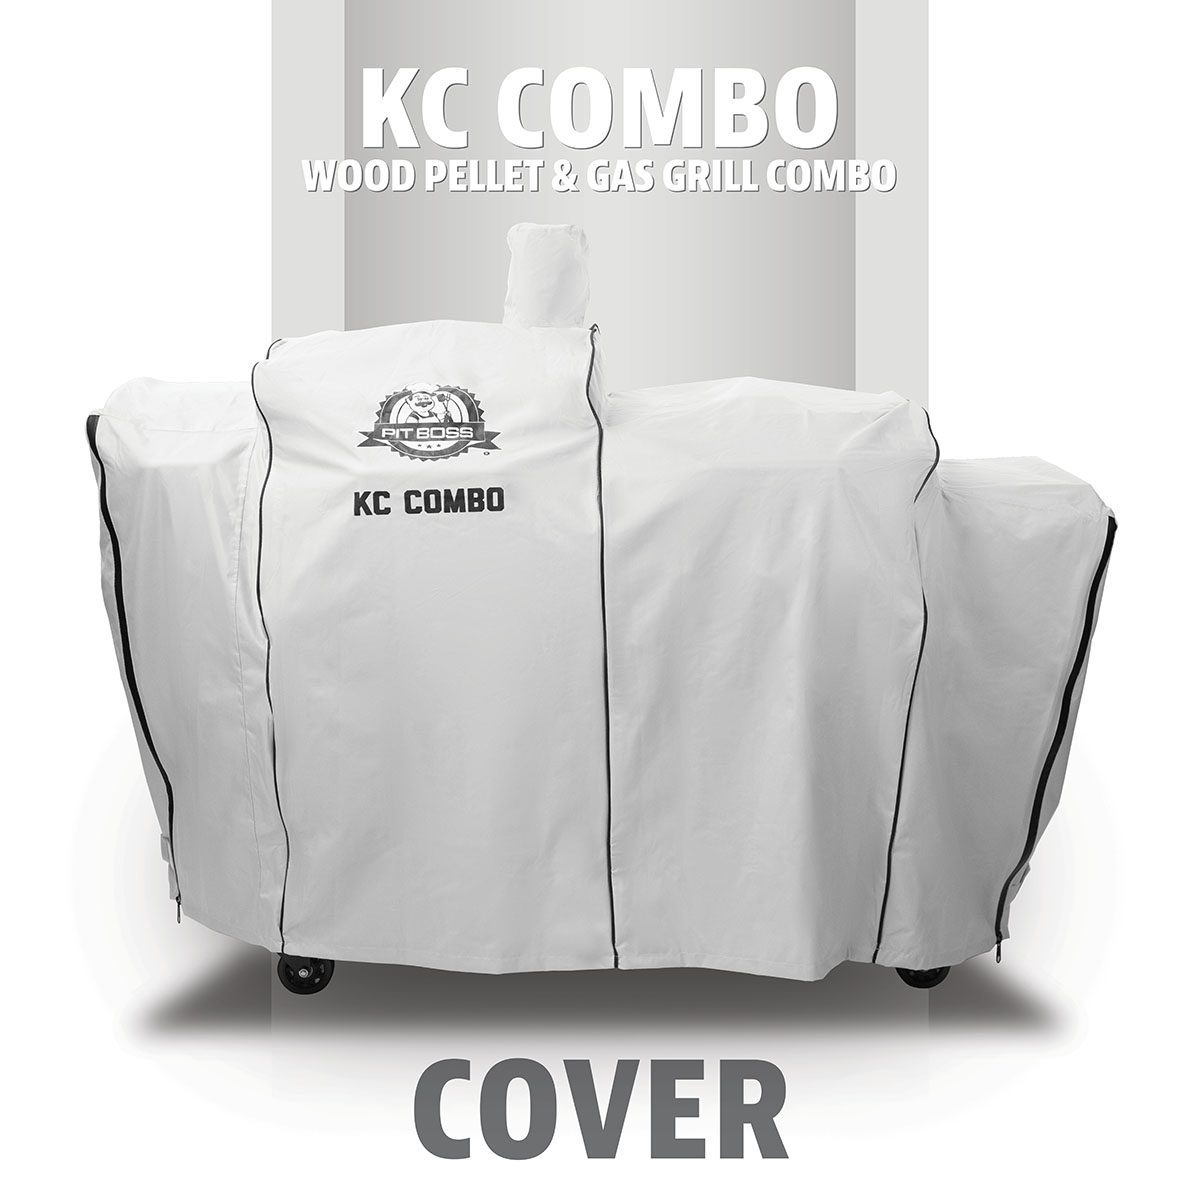 Pit Boss Platinum KC Combo Grill Cover, Fits KC Combo Platinum Grill - image 3 of 12